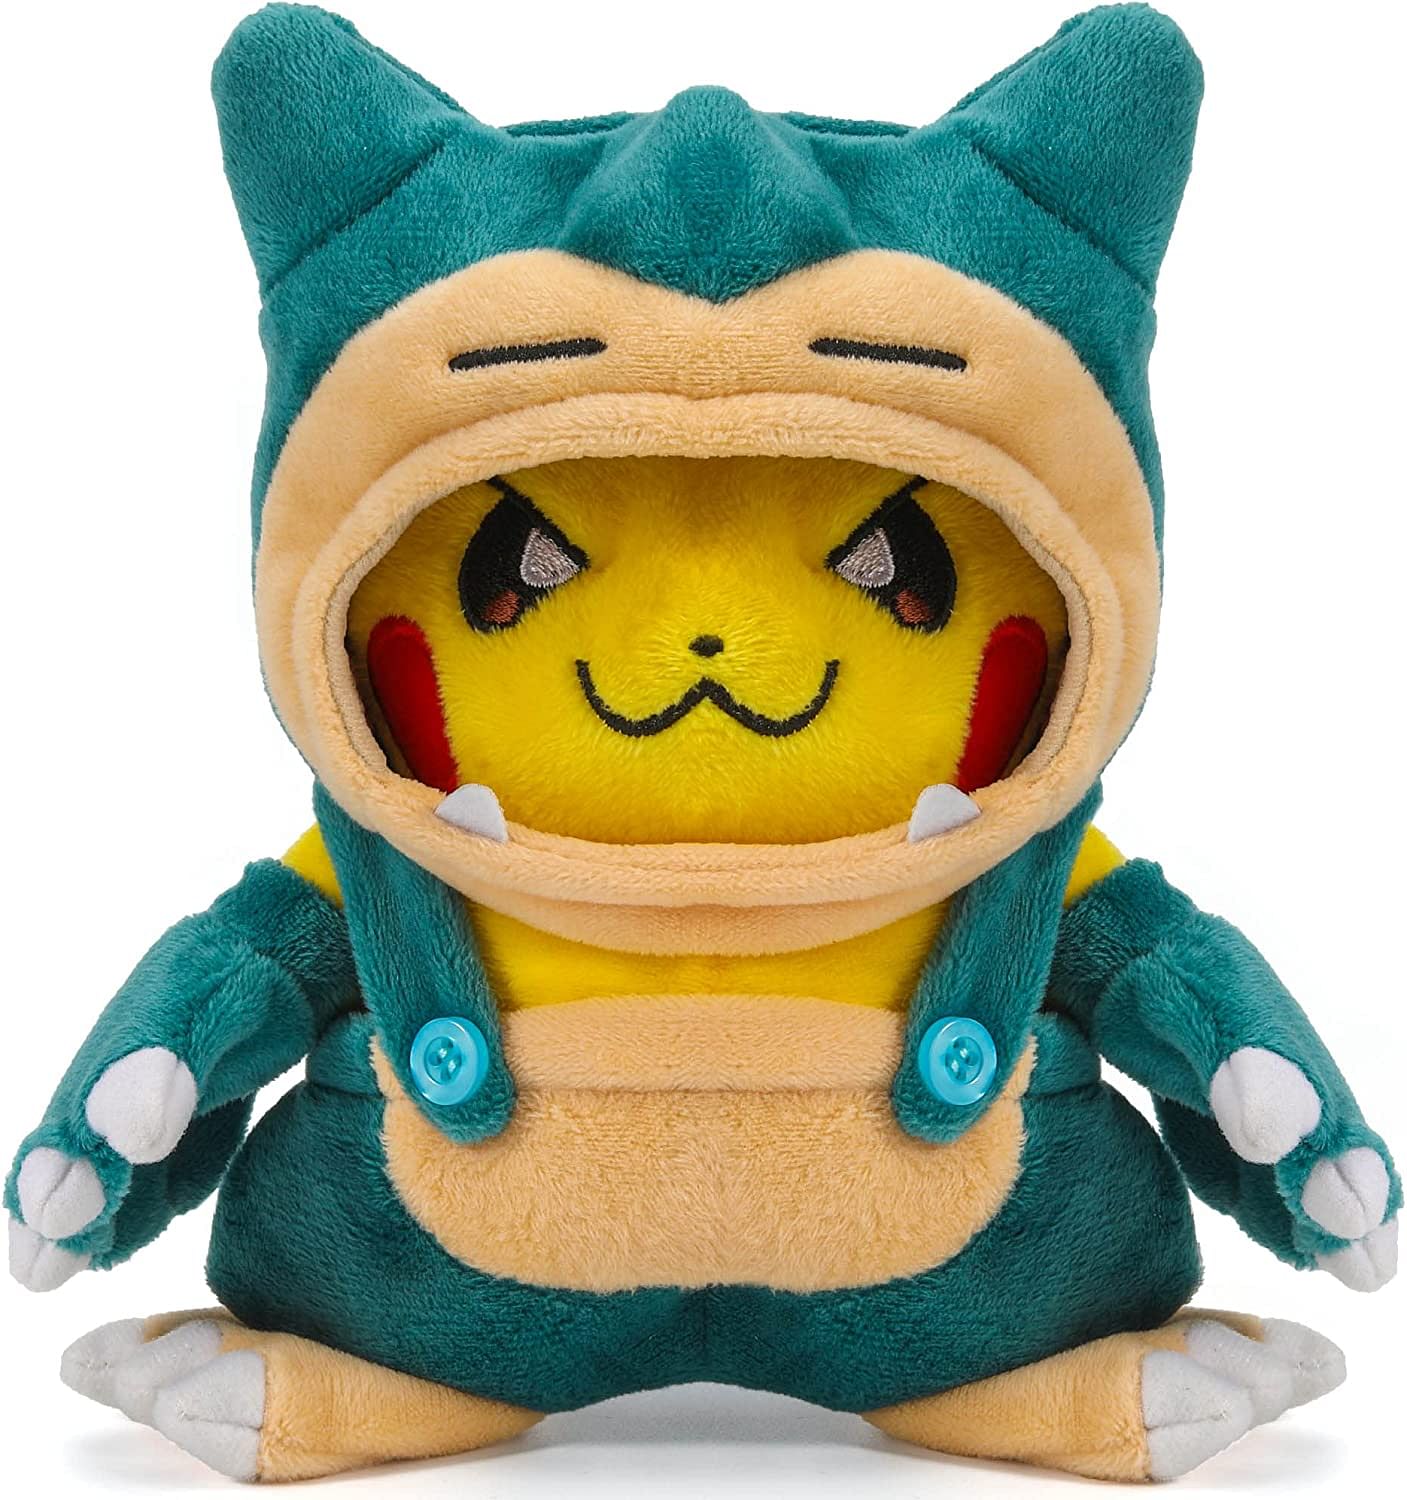 Anime Plushies: The Perfect Gift for Any Anime Fan